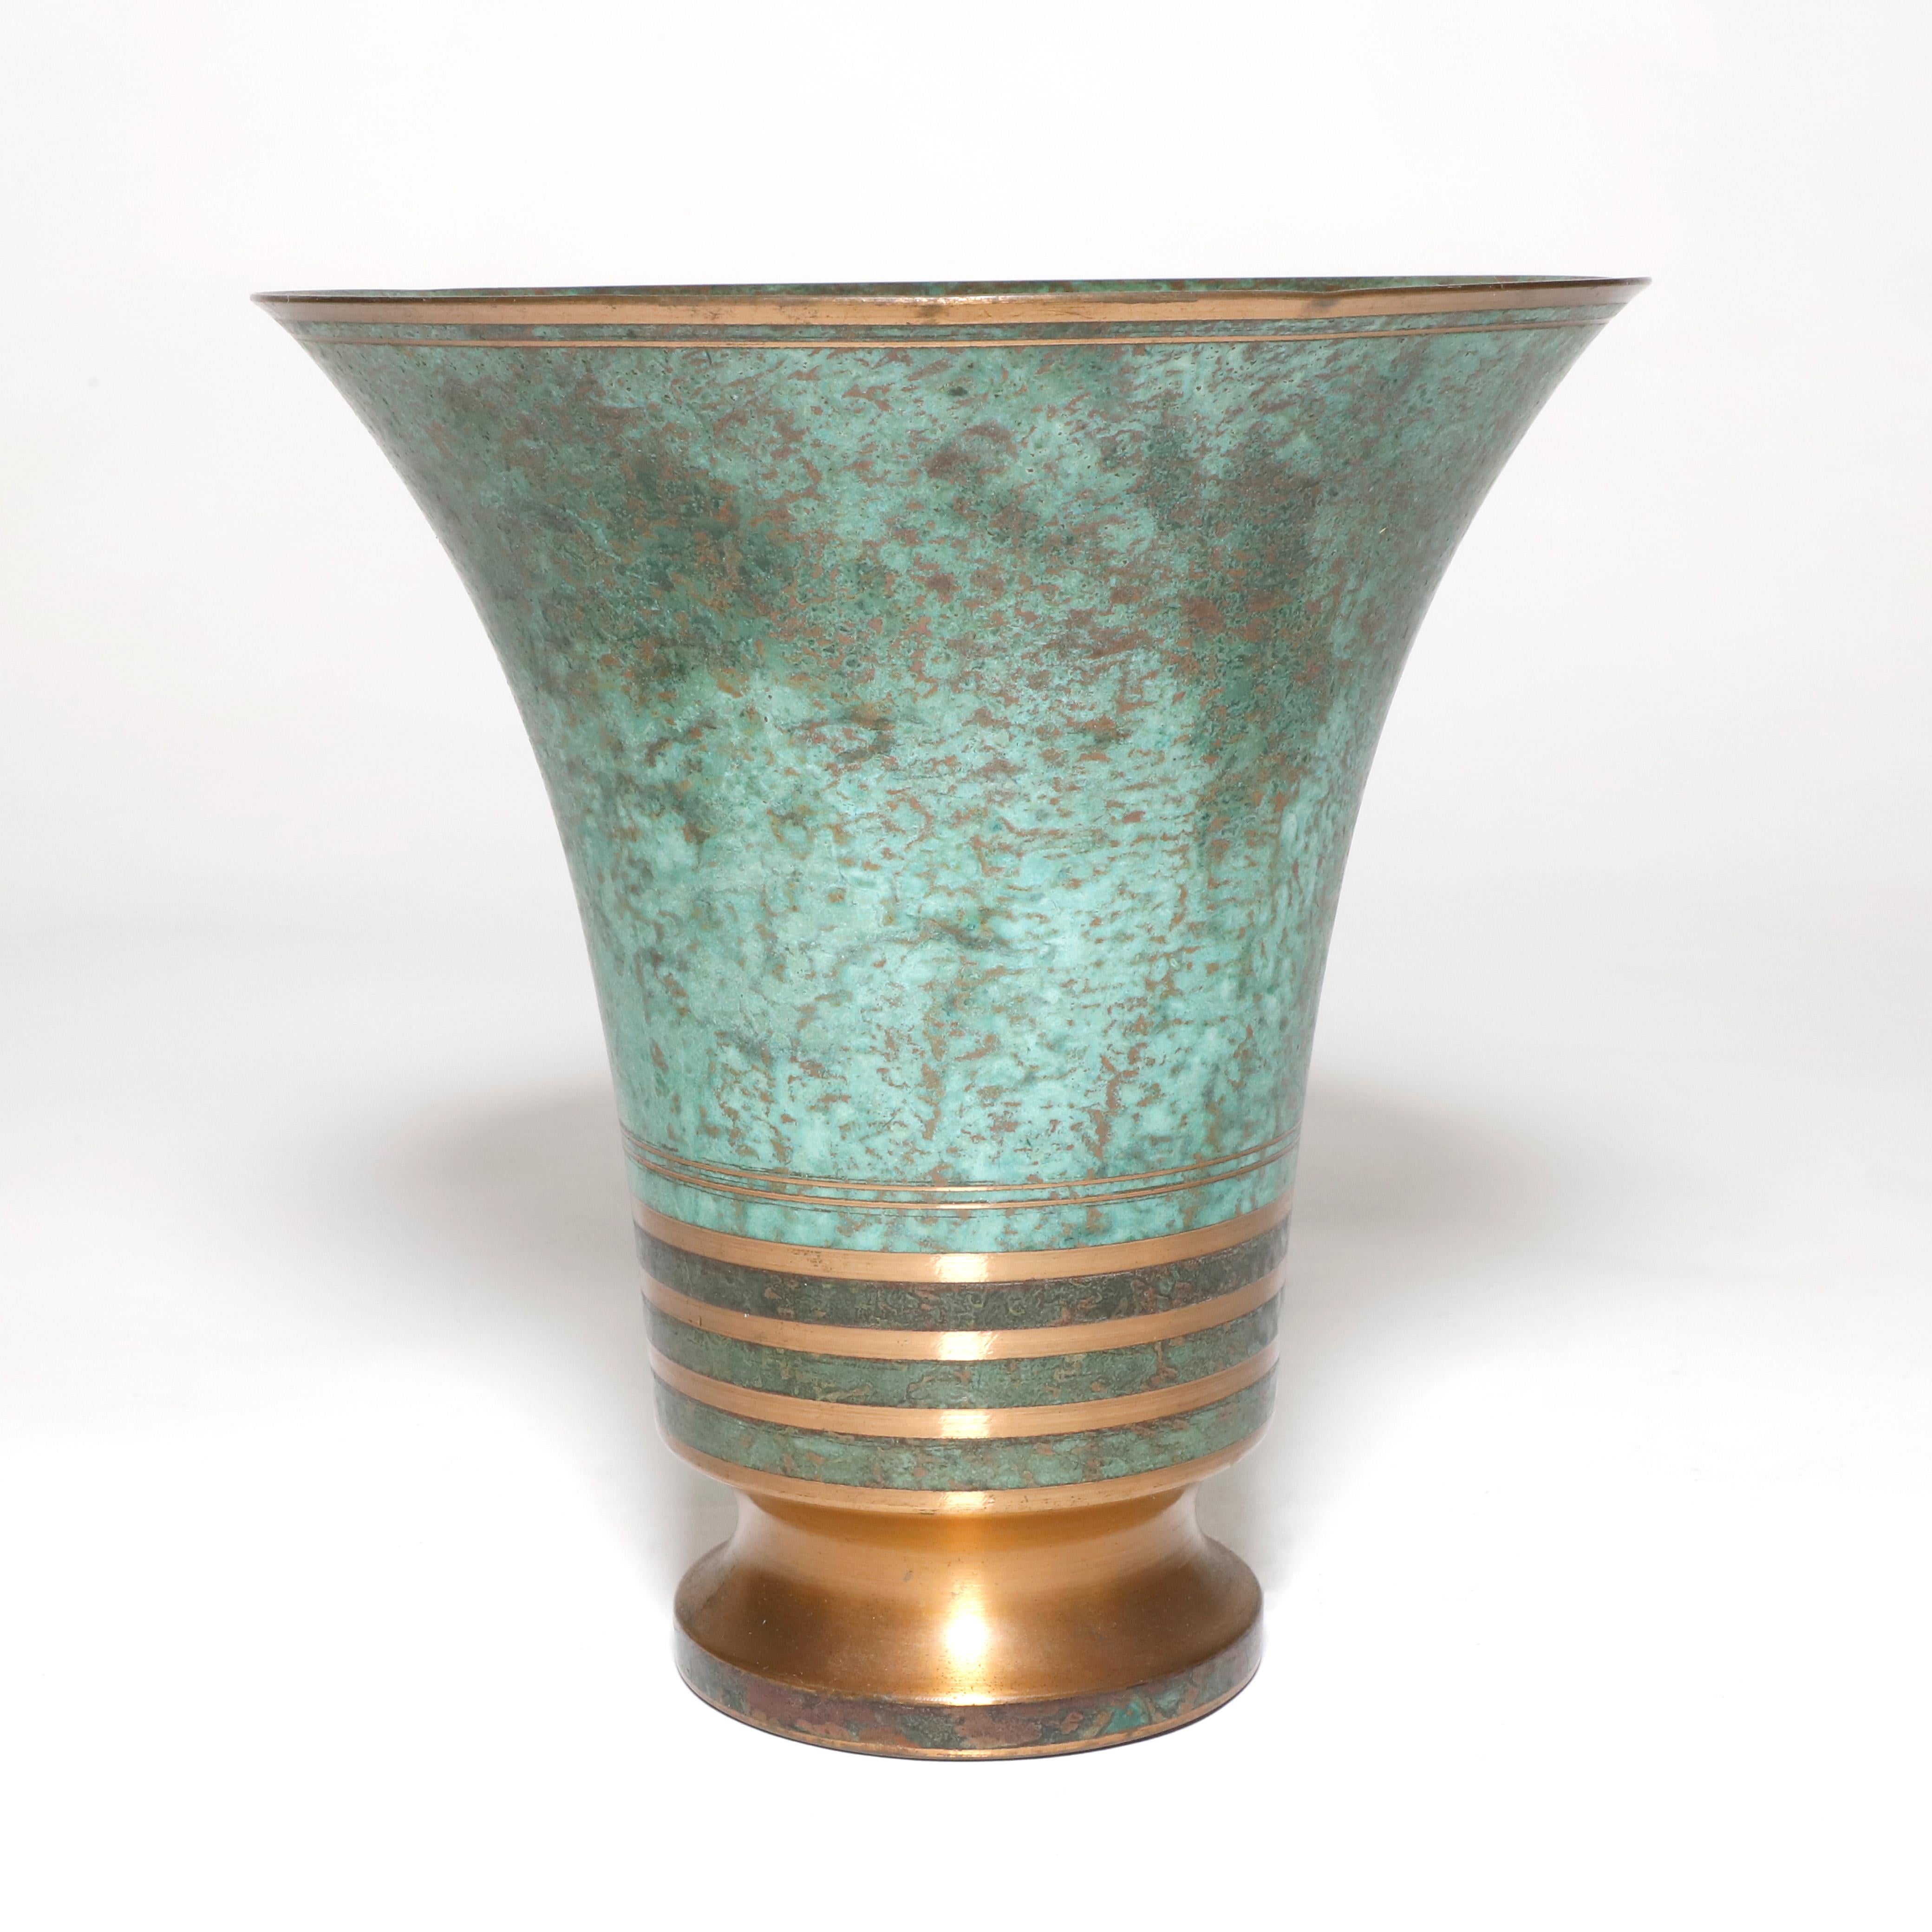 1960 patinated bronze base by the famous designer Carl Sorensen. This Art Deco piece has shinny bronze lines evenly spaced in the rim and bottom of the vase that give great contrast with the natural green patina. Stamped and signed at the